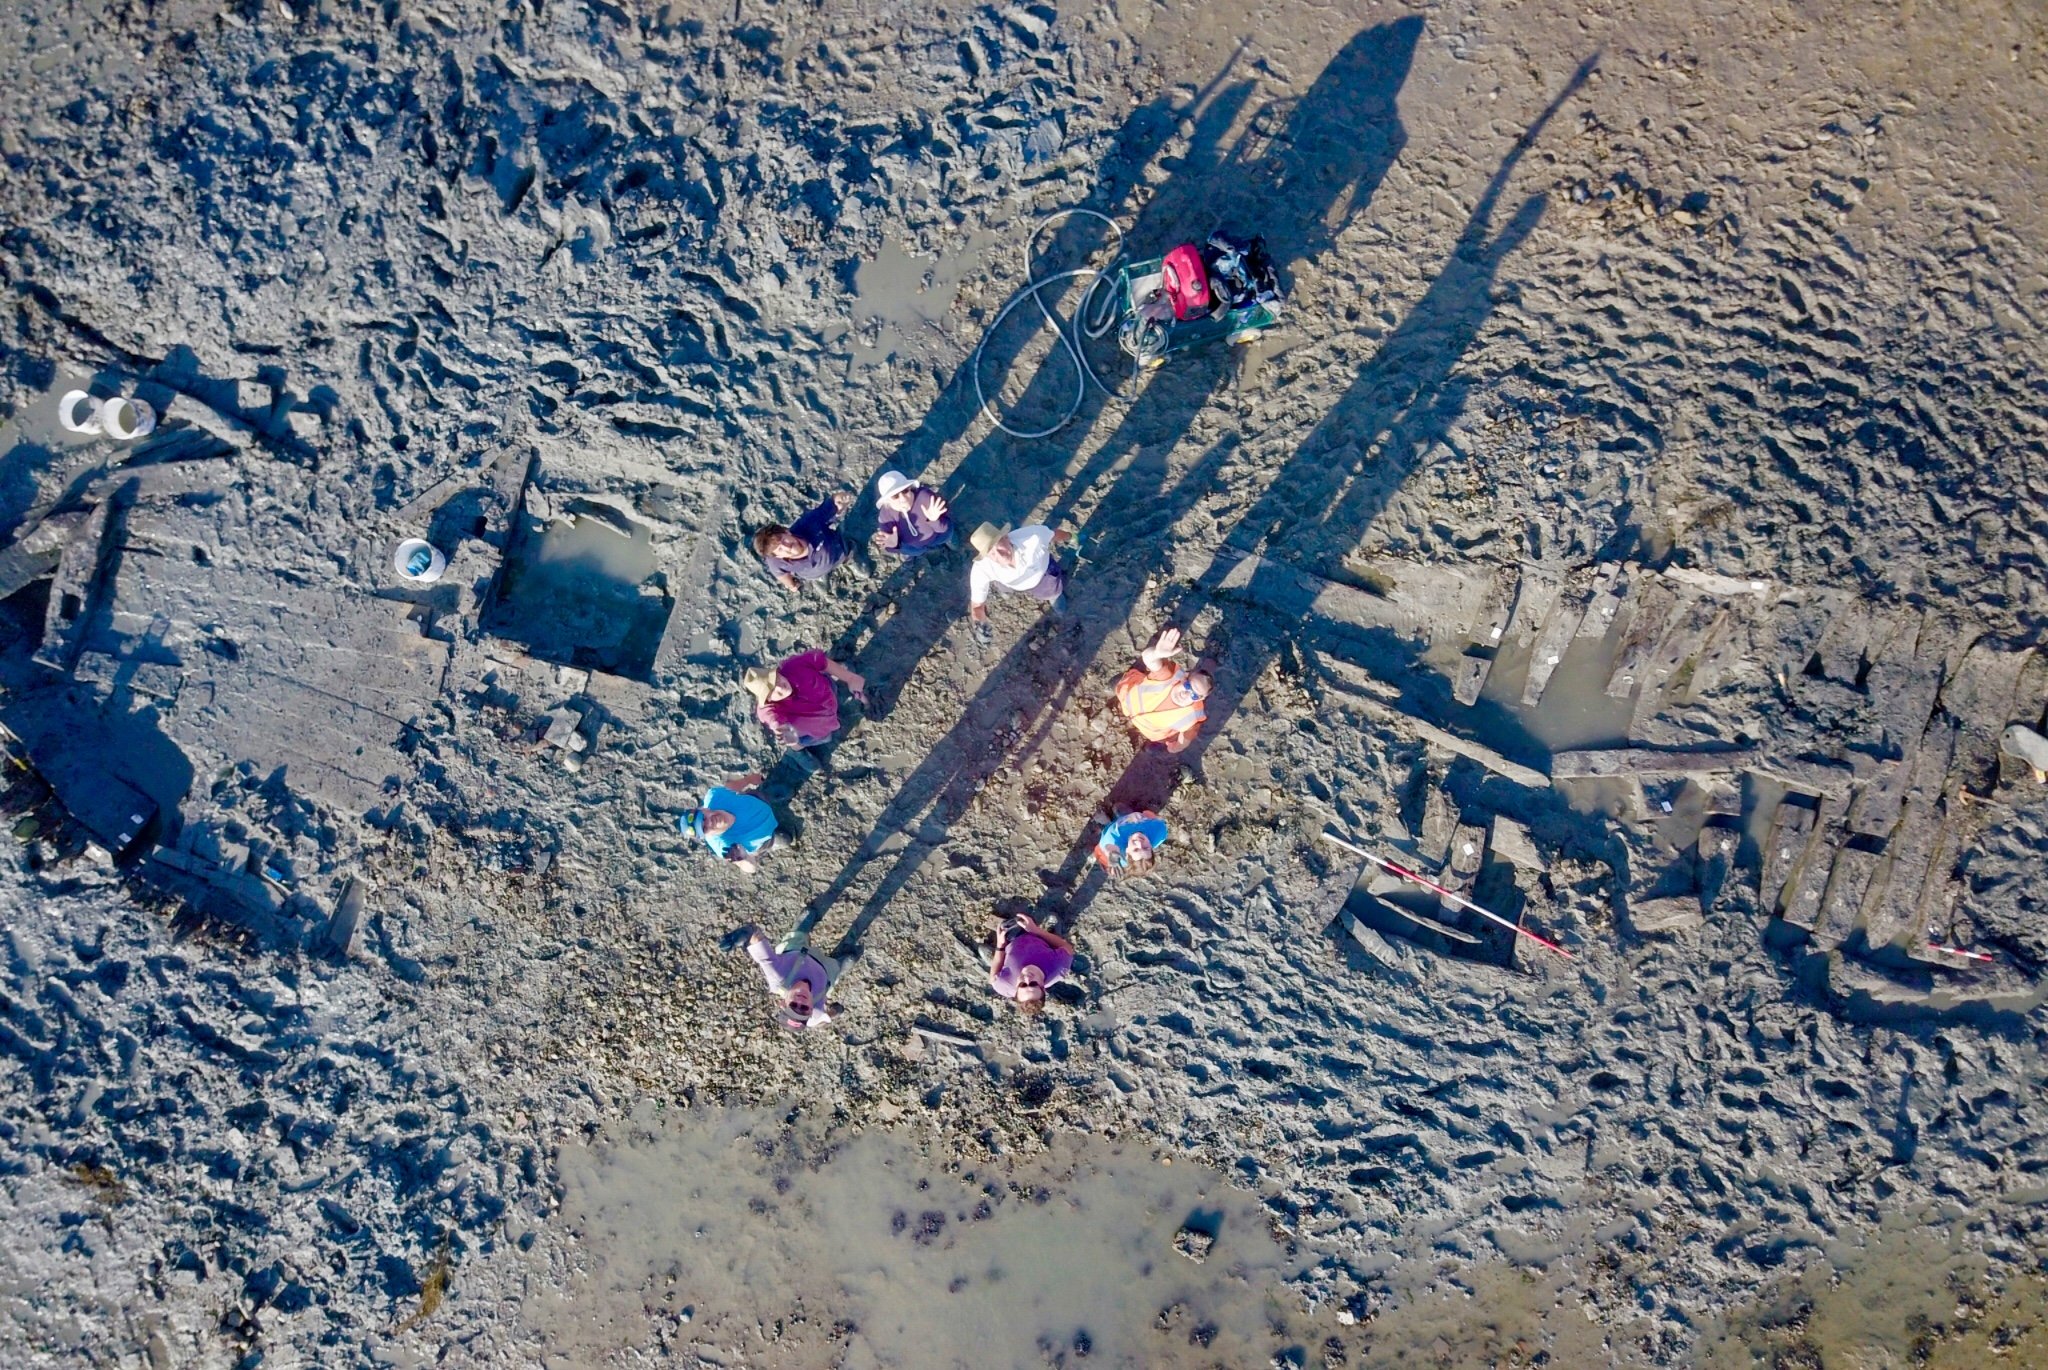 Aerial image of the early-18th century wreck of the Old Brig emerging from mud and sand of the Thames Estuary at Seasalter, north Kent.